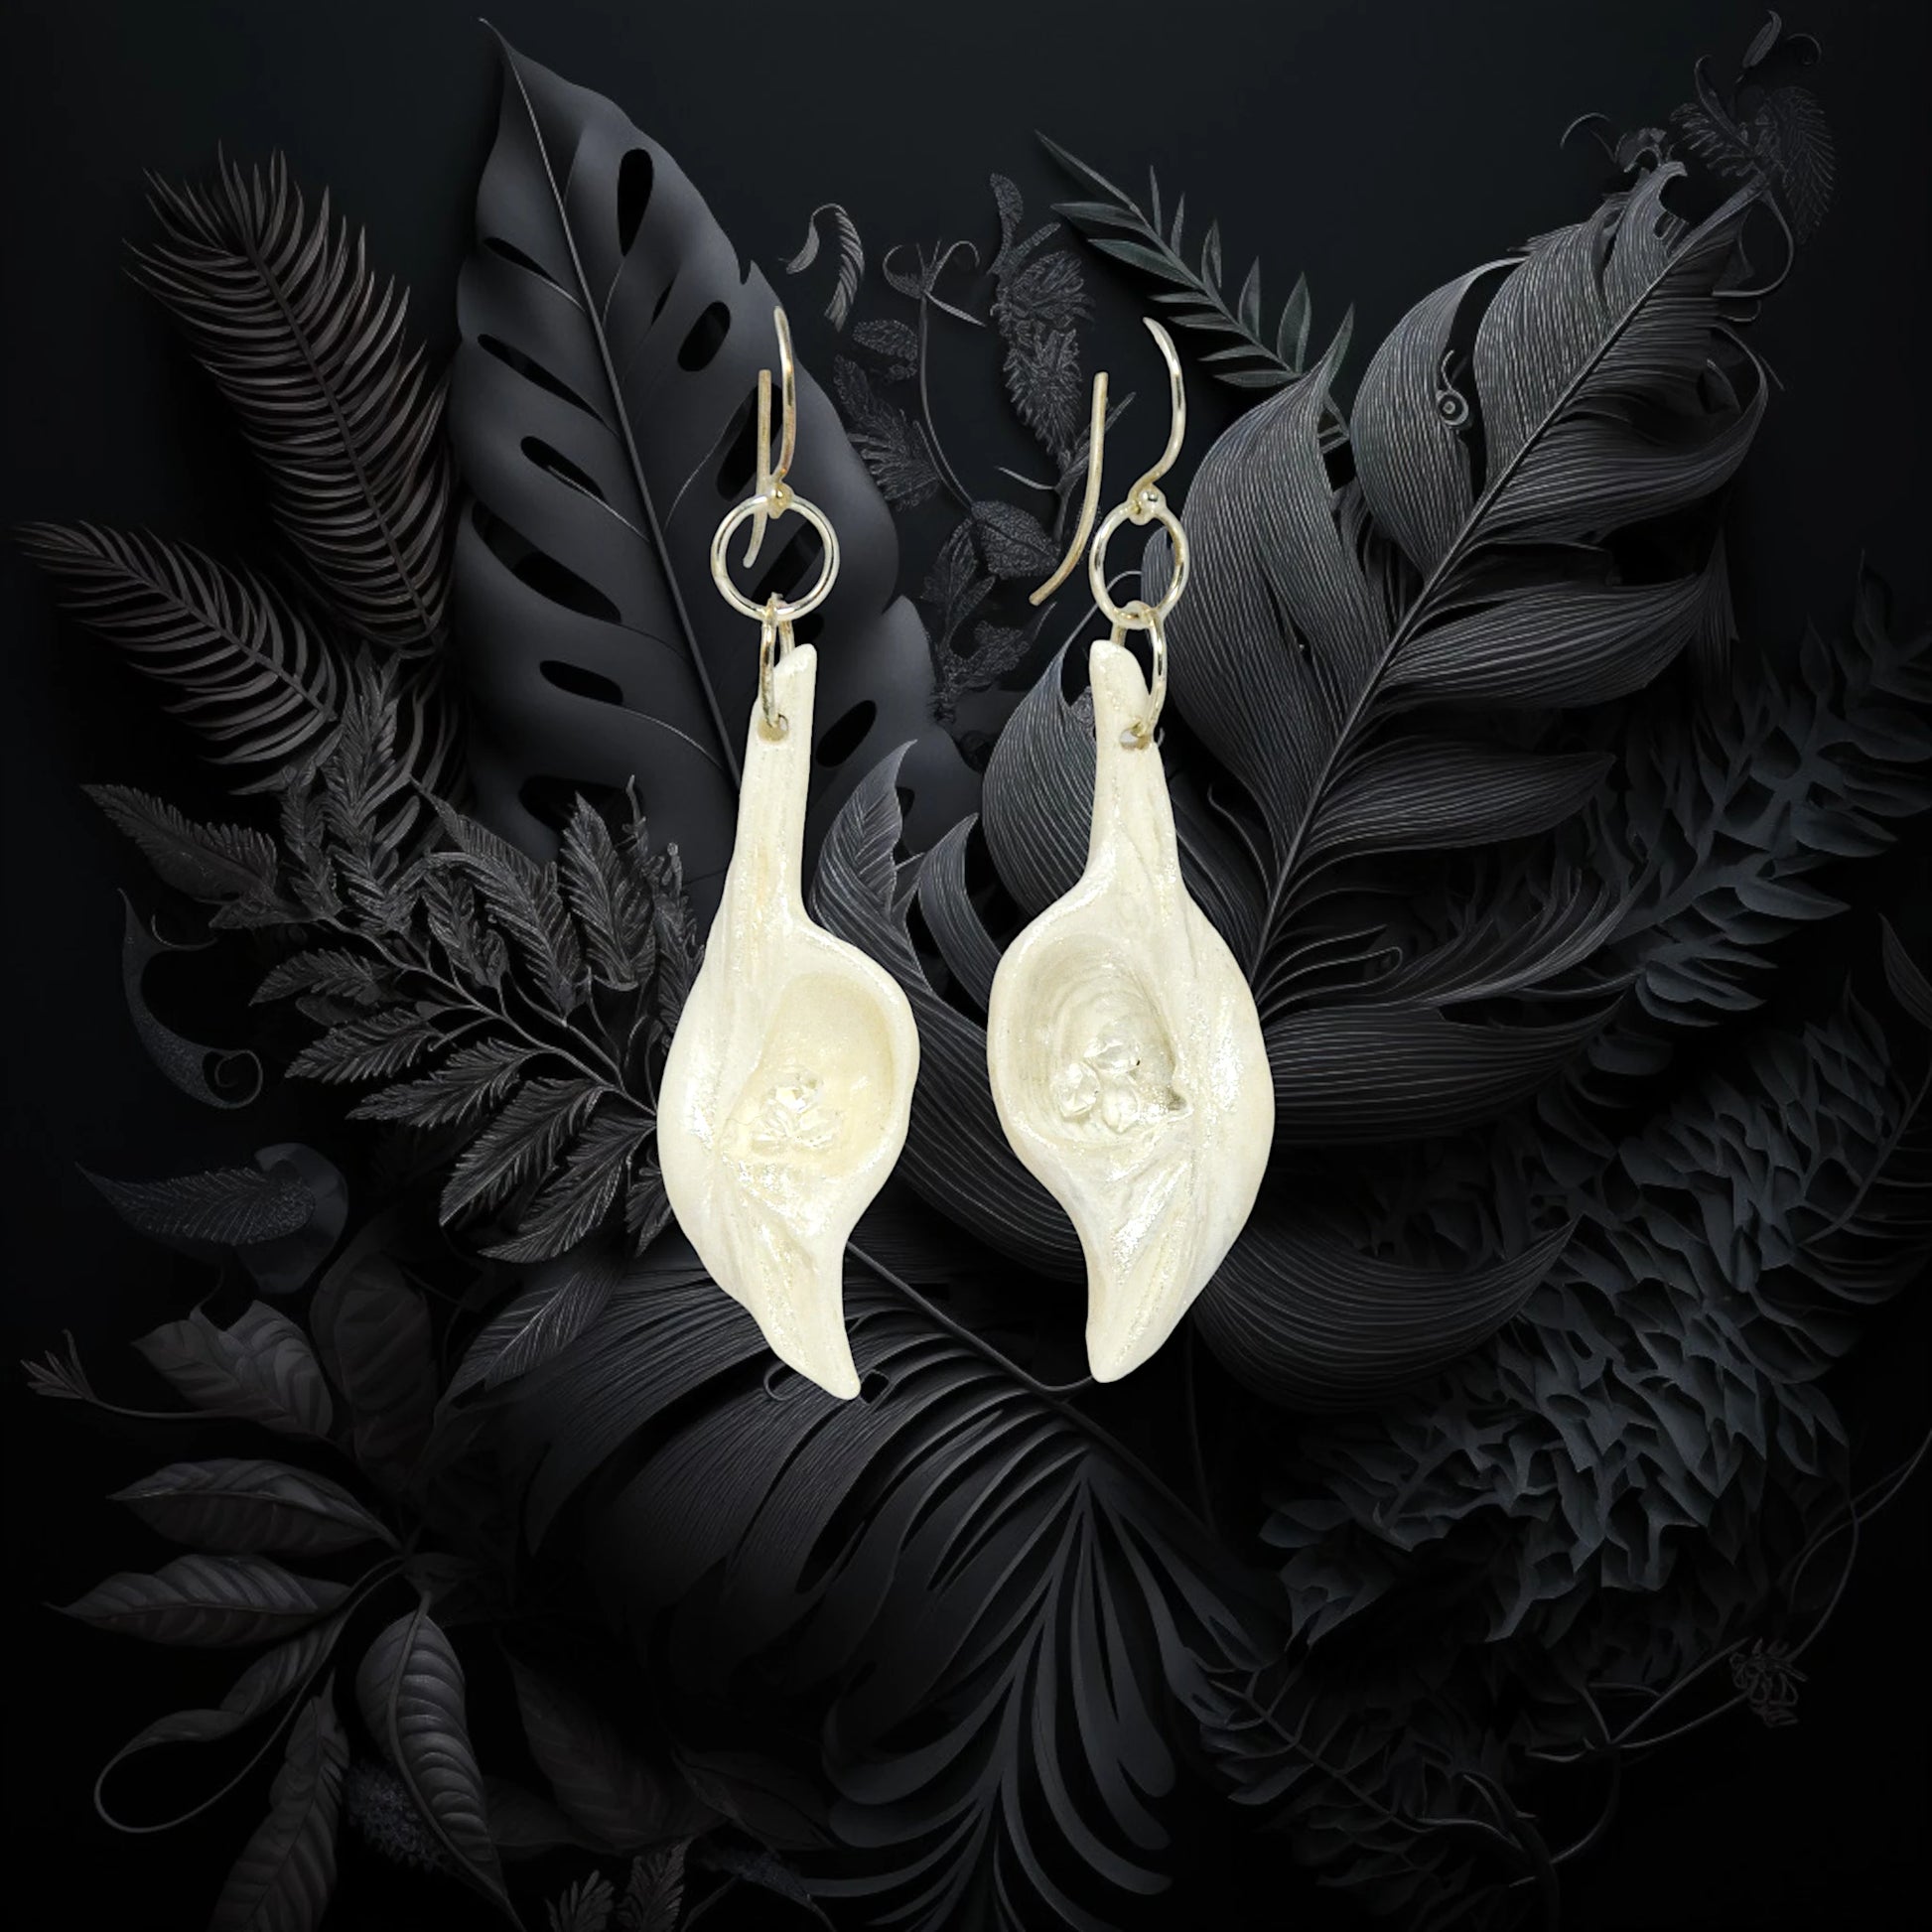 Dream Stone natural seashell earrings with herkimer diamonds. The earrings are shown on a black background.